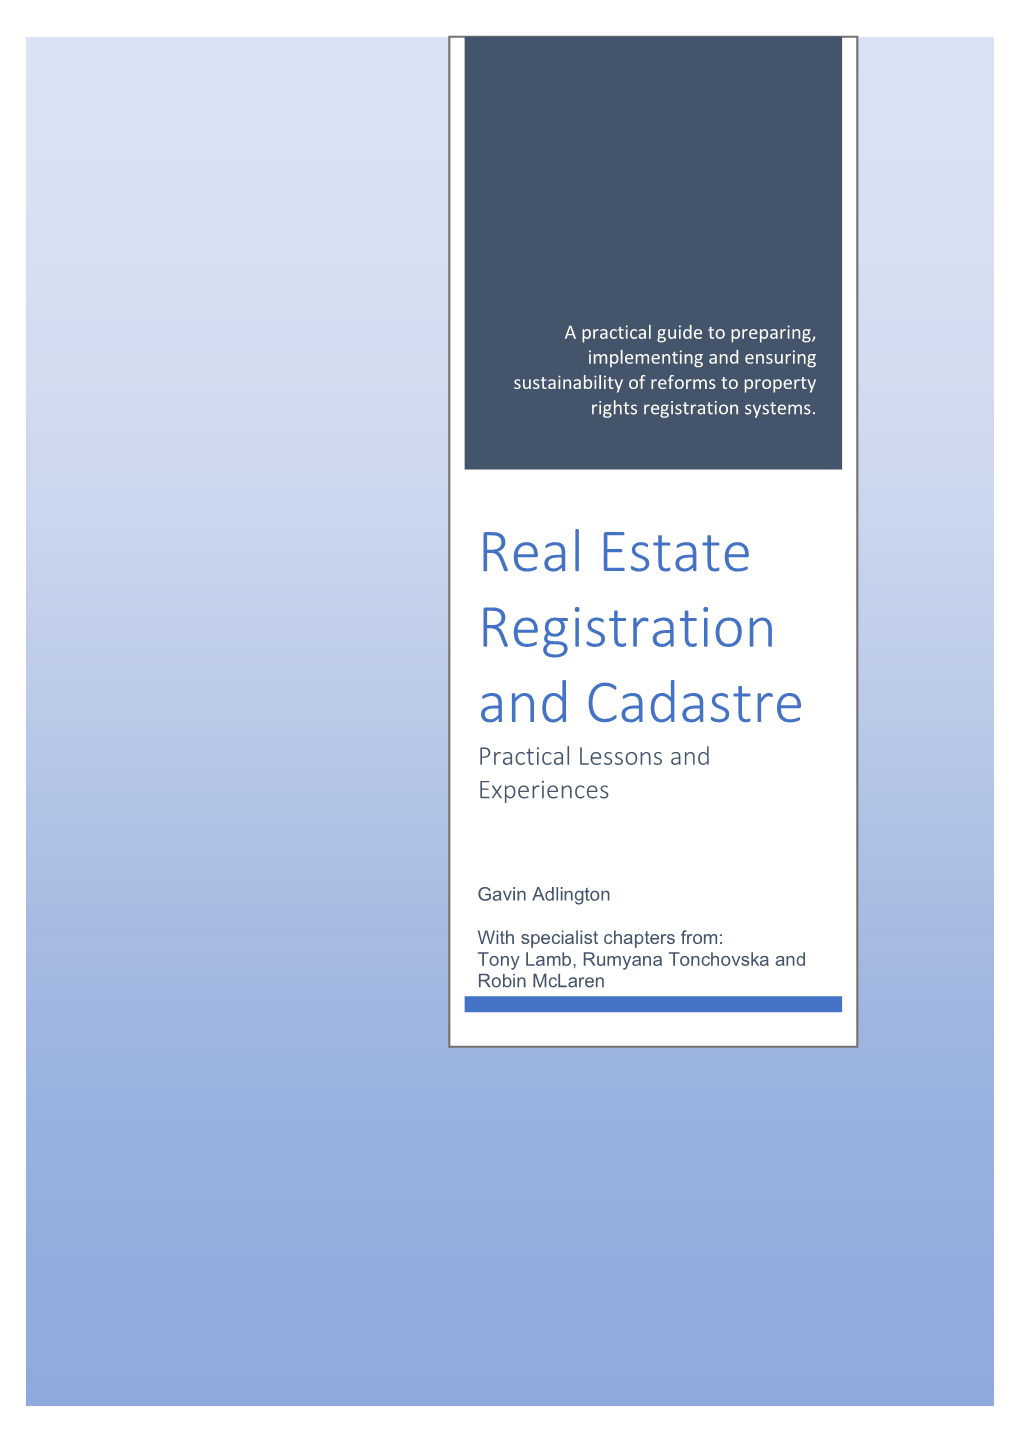 Real Estate Registration and Cadastre. Practical Lessons and Experiences. Adlington, Lamb, Tonchovska and Mclaren